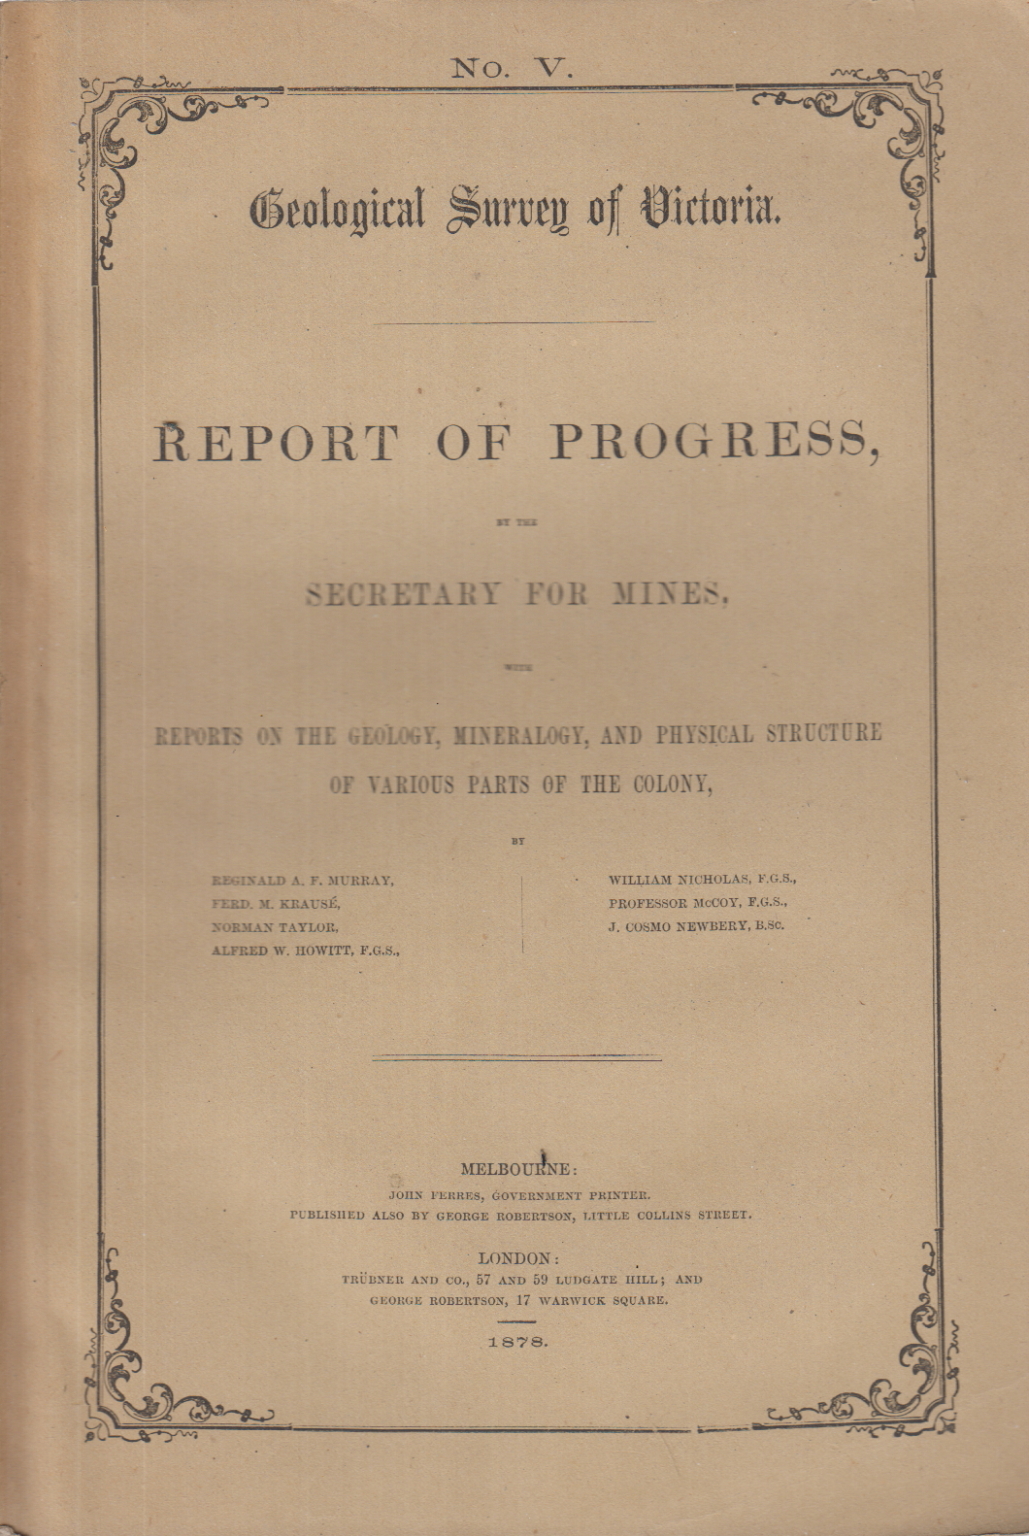 Geological Survey of Victoria. Report of progress, AA.VV.